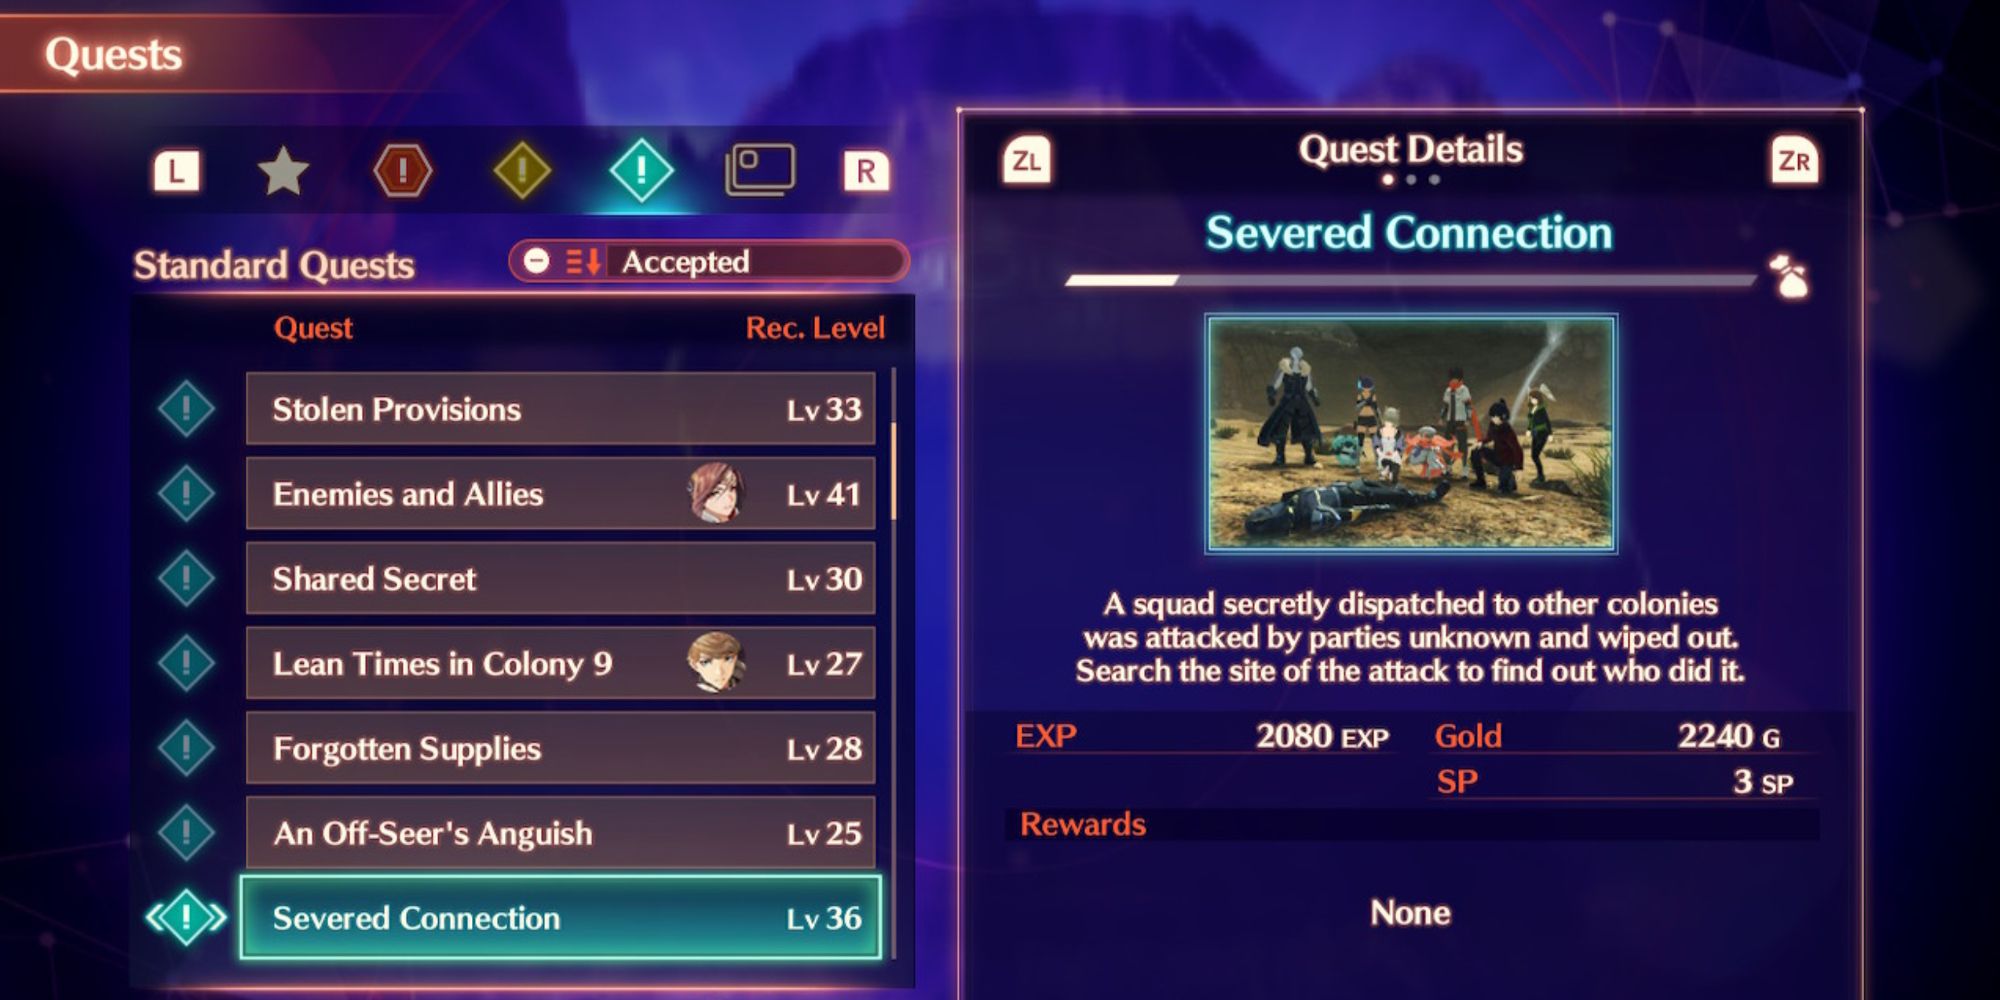 A Colony Quest in Xenoblade Chronicles 3